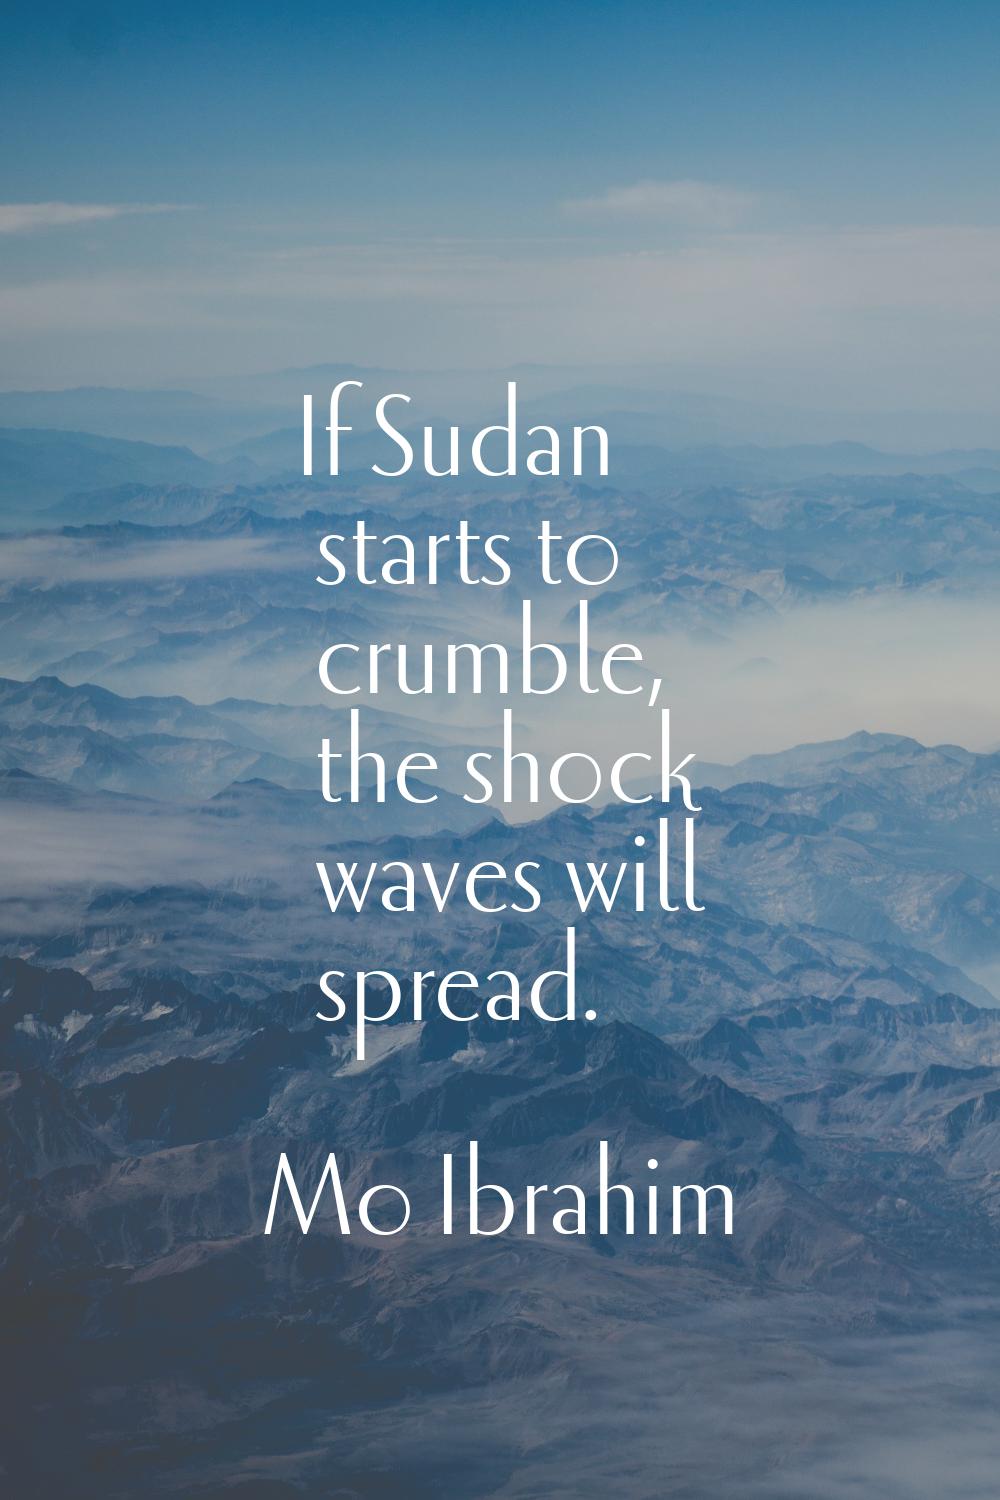 If Sudan starts to crumble, the shock waves will spread.